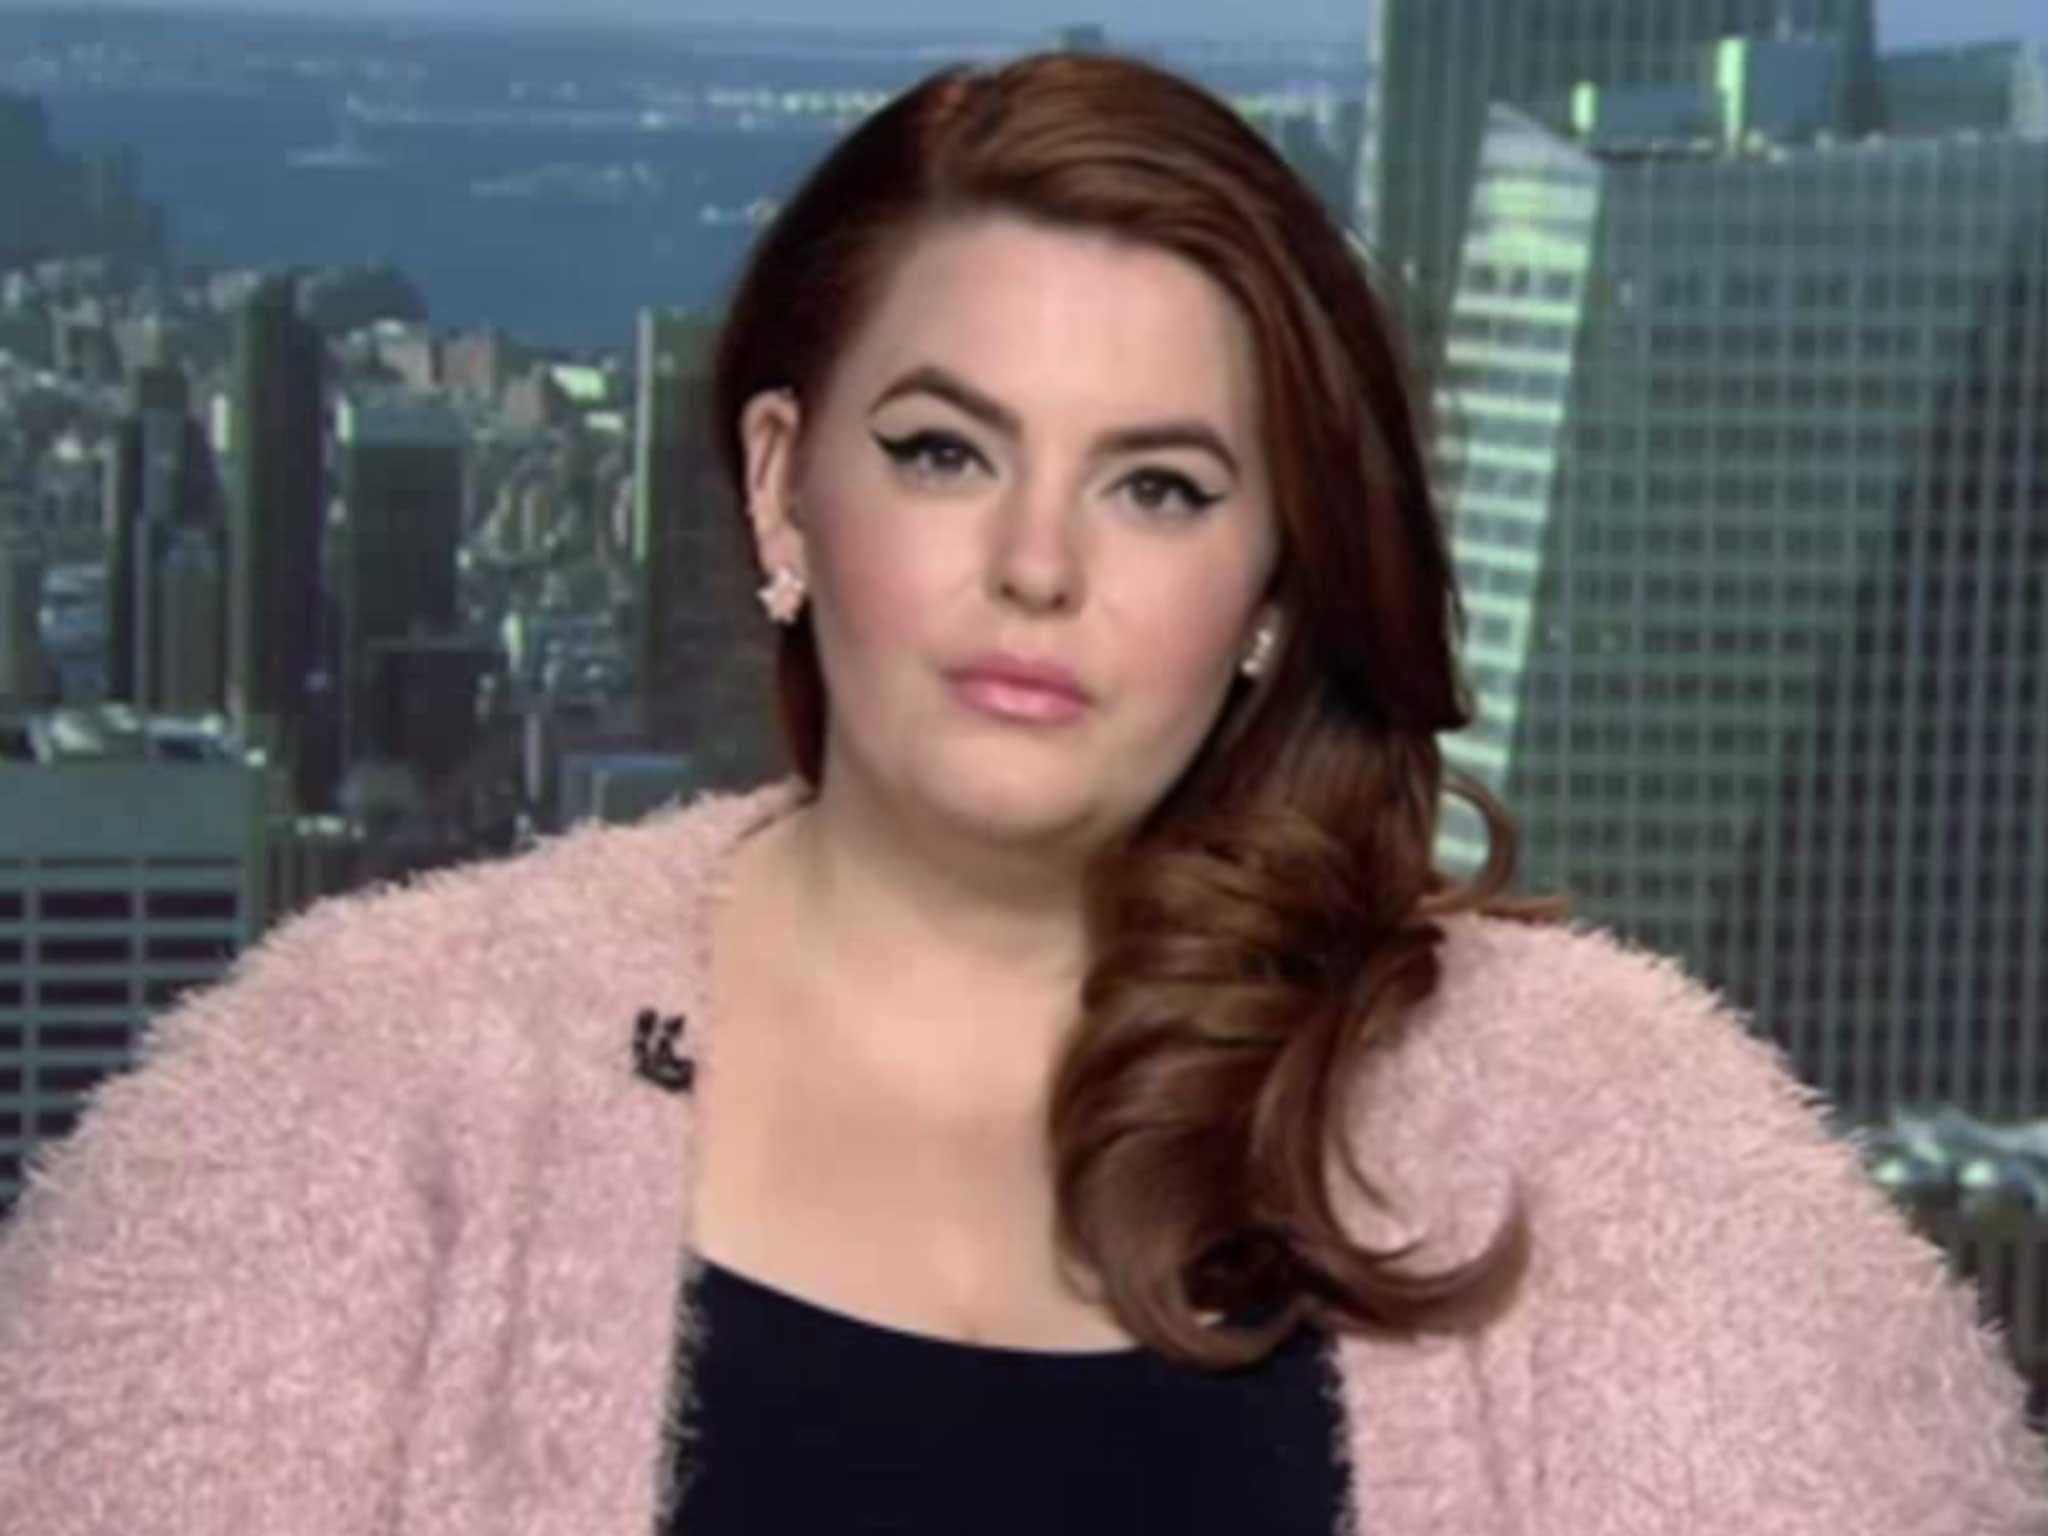 Tess Holliday has been held up as a role model